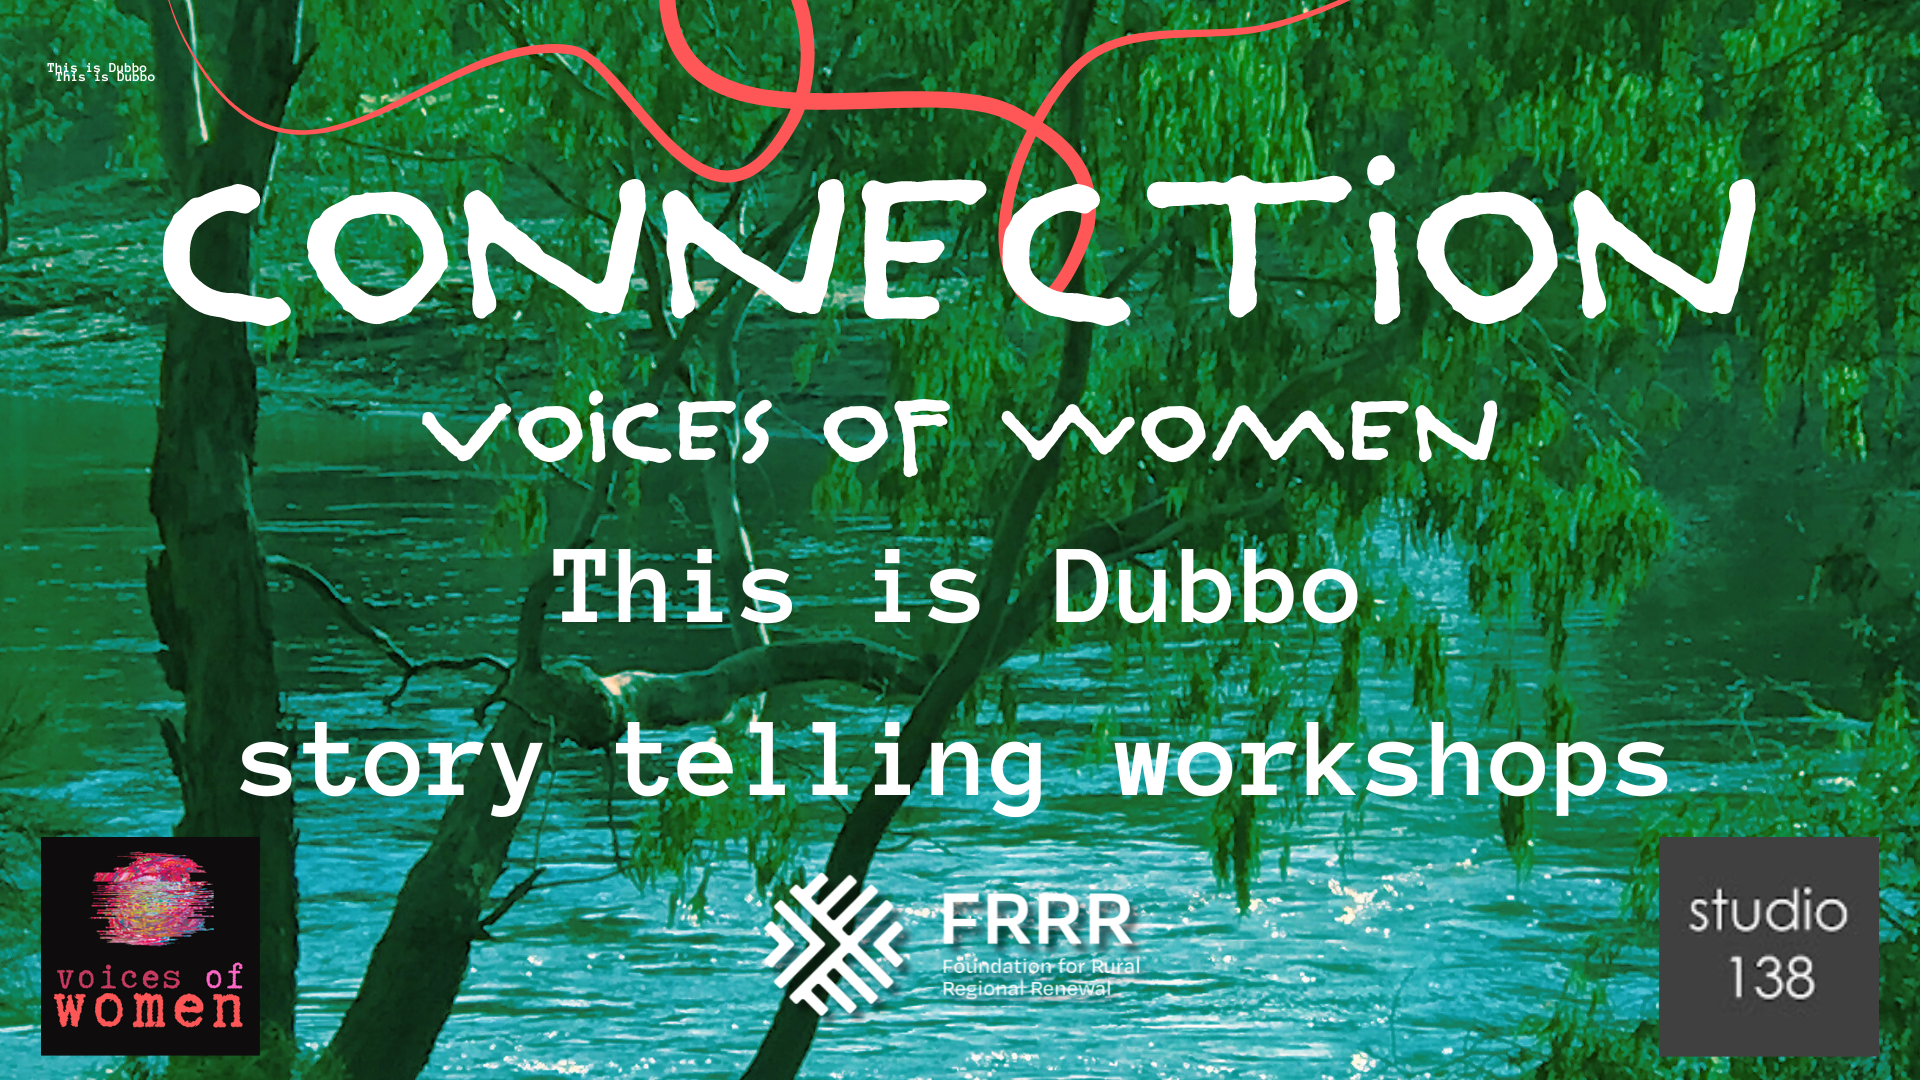 Image of trees on the banks of the Wambuul River with a red curvy line running across the top and the word "Connection - Voices of Women. This is Dubbo story telling workshops."